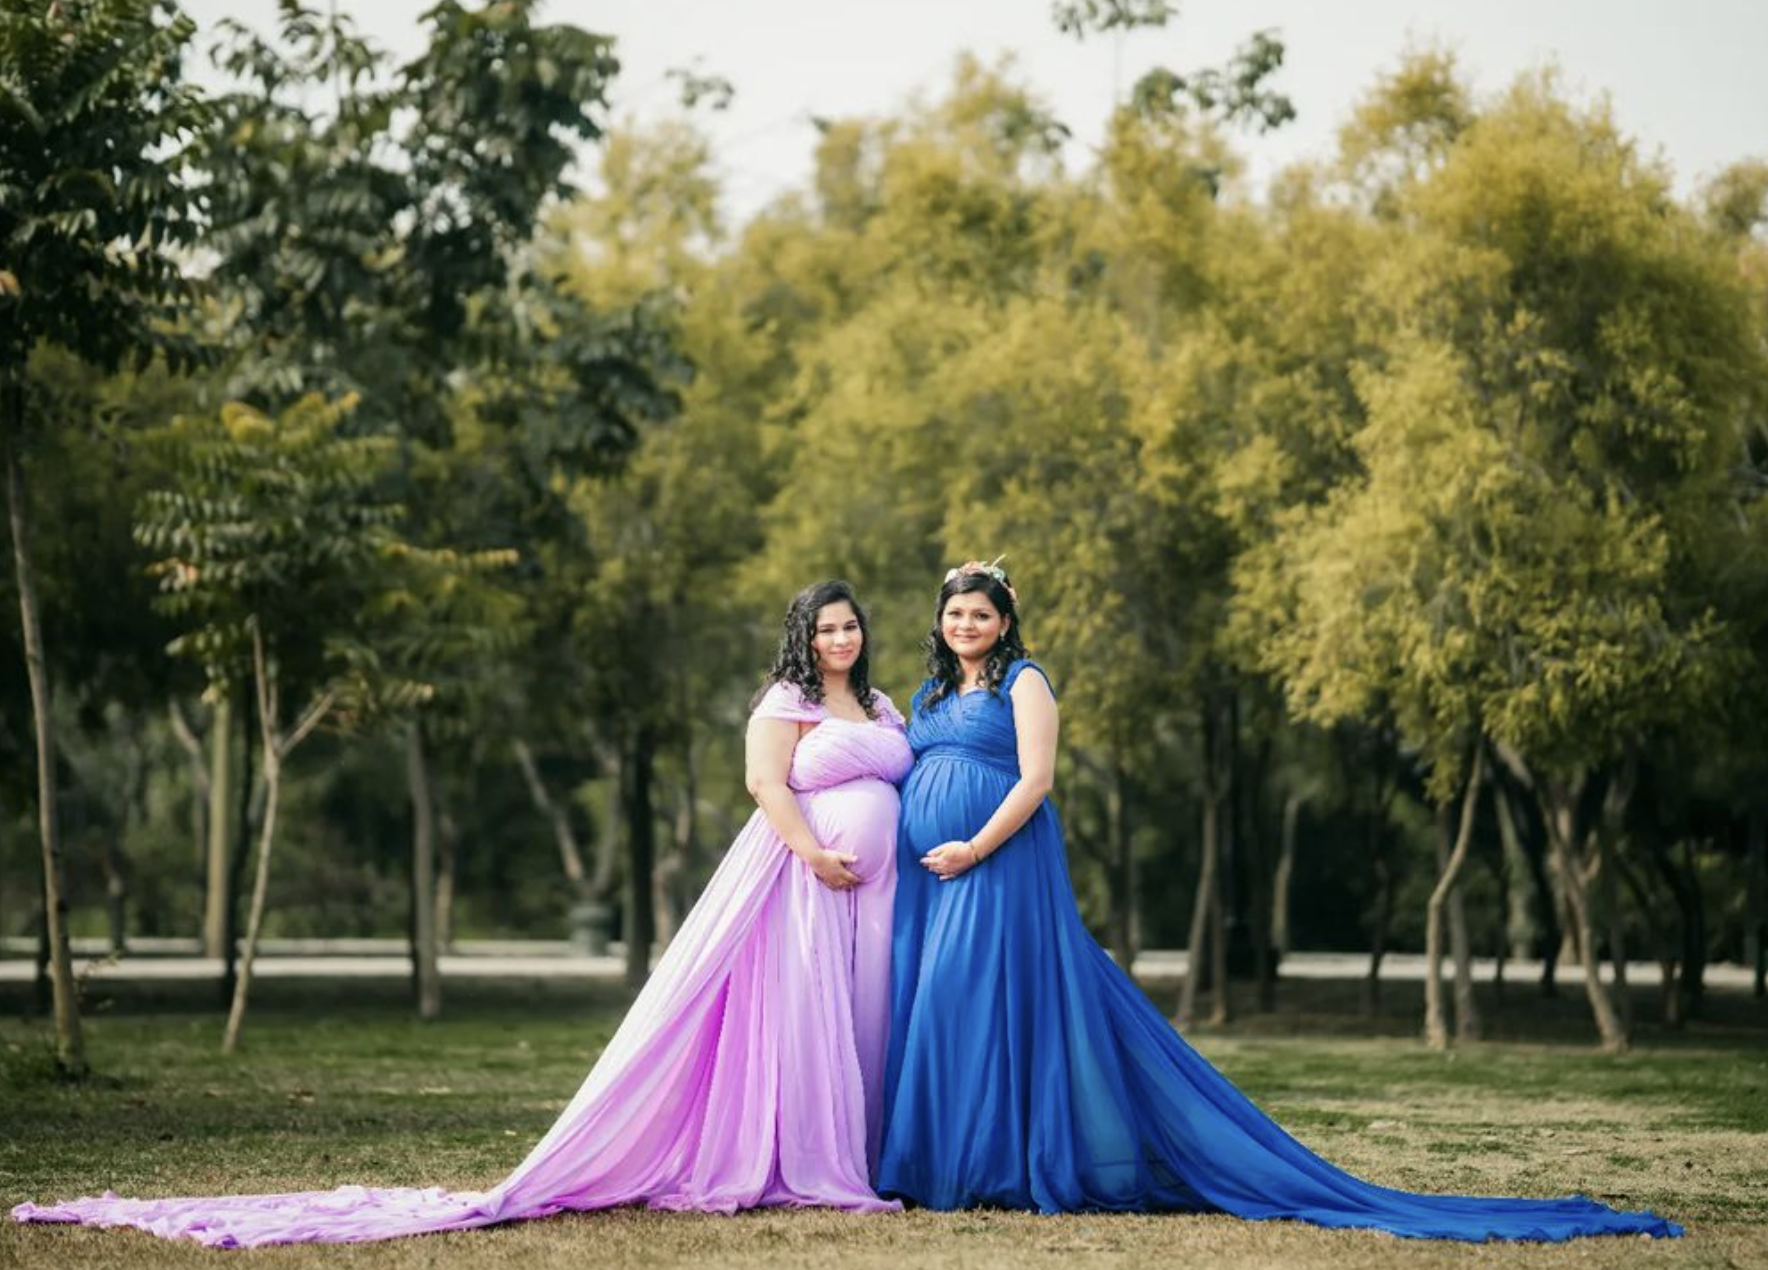 Pregnancy Gowns at Best Price on Rent